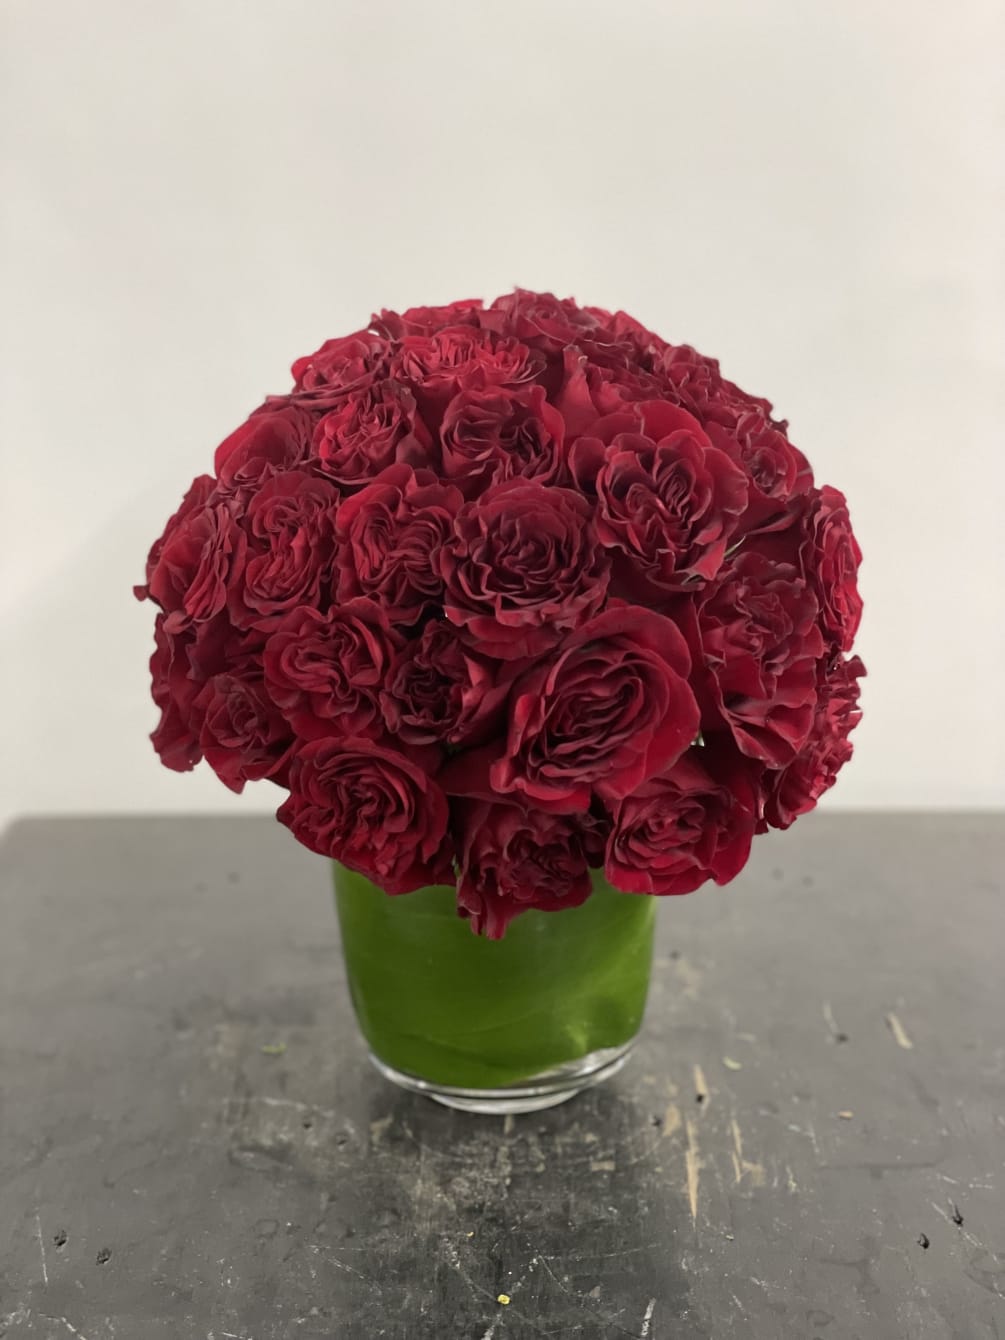 Say I love you with these ruffled burgundy variety also known as